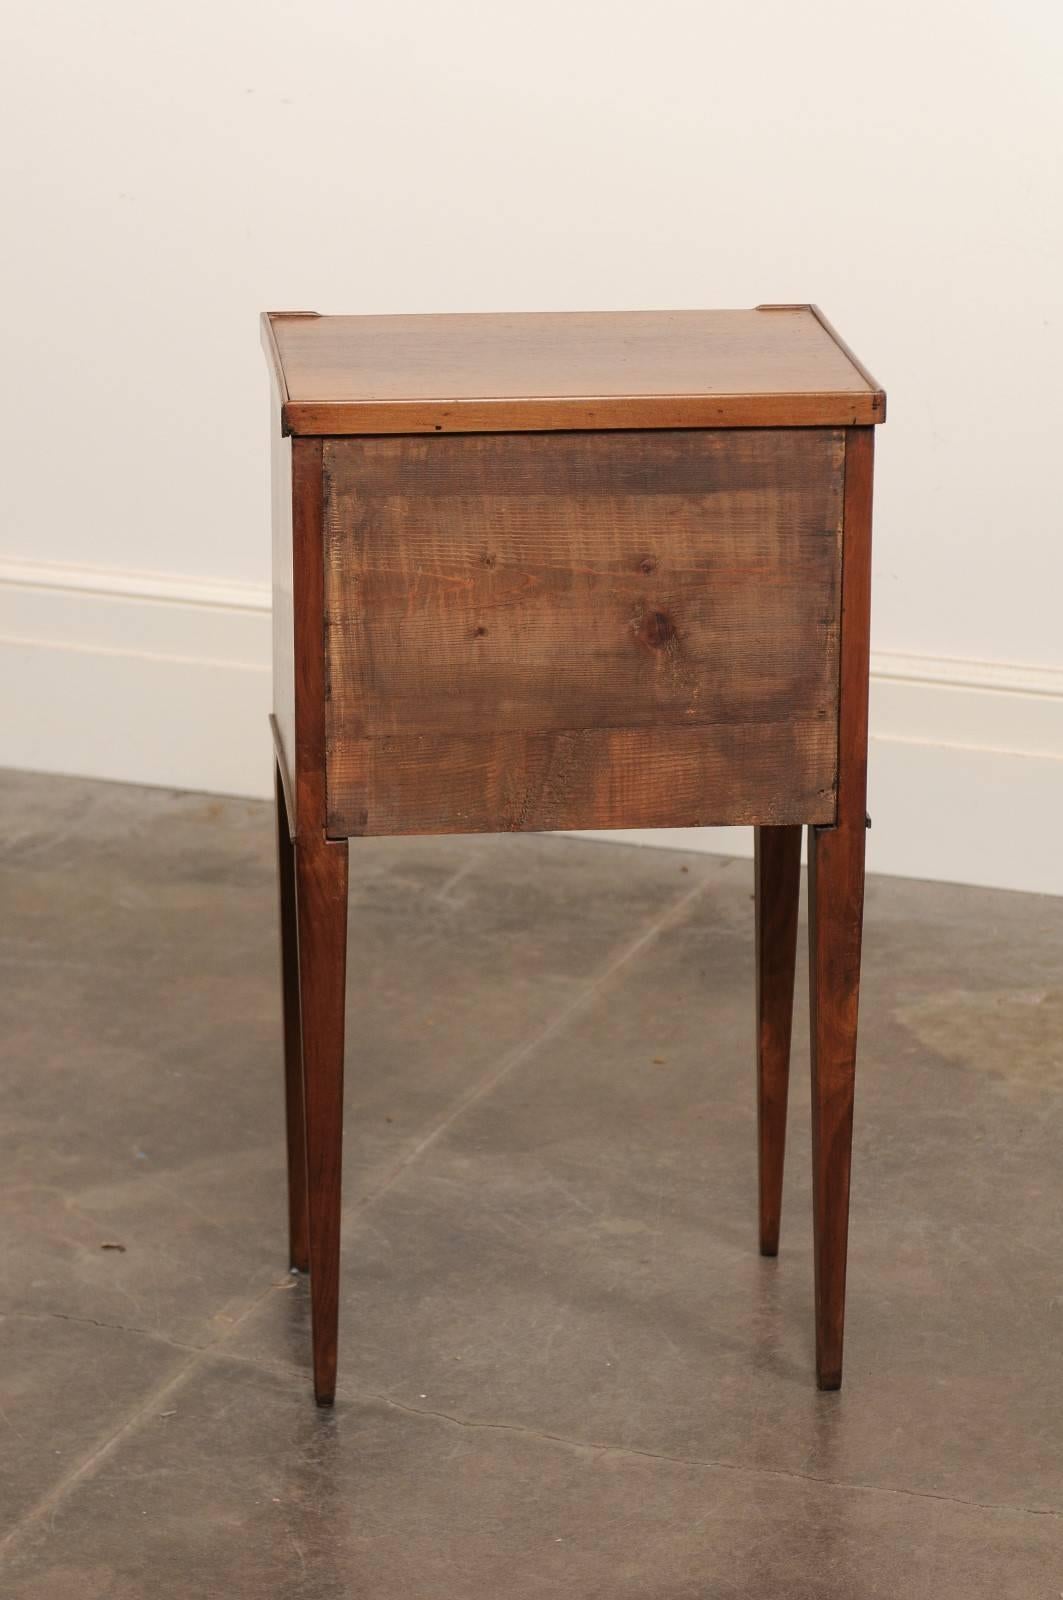 French Mahogany Turn of the Century Side Table with Two Drawers and Tapered Legs 2